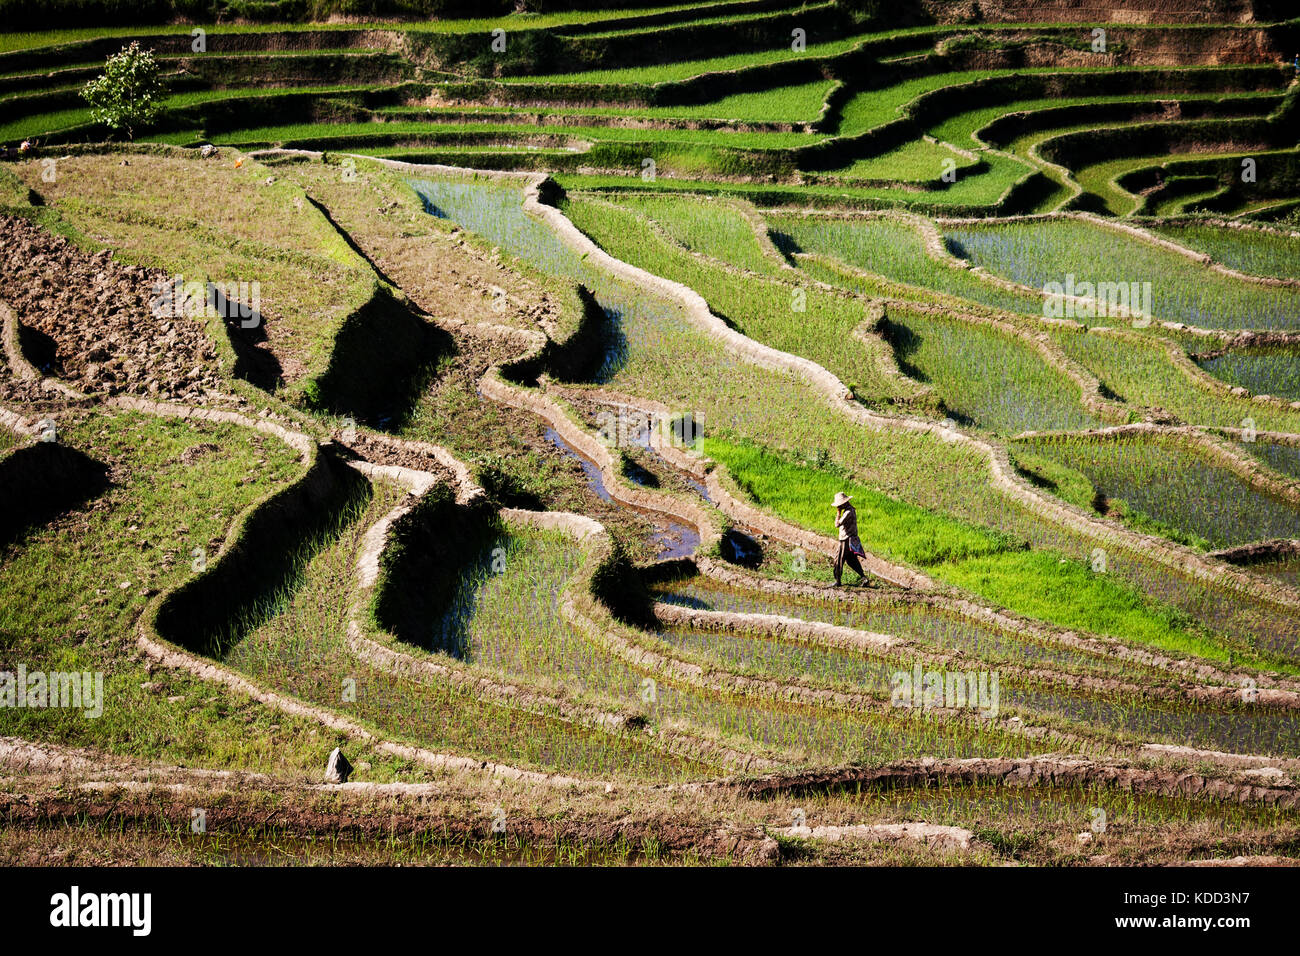 Tribal women walks across the famous rice terraces of Yuanyang in Yunnan. Beginning of the growing season when rice paddy crops are being prepared Stock Photo